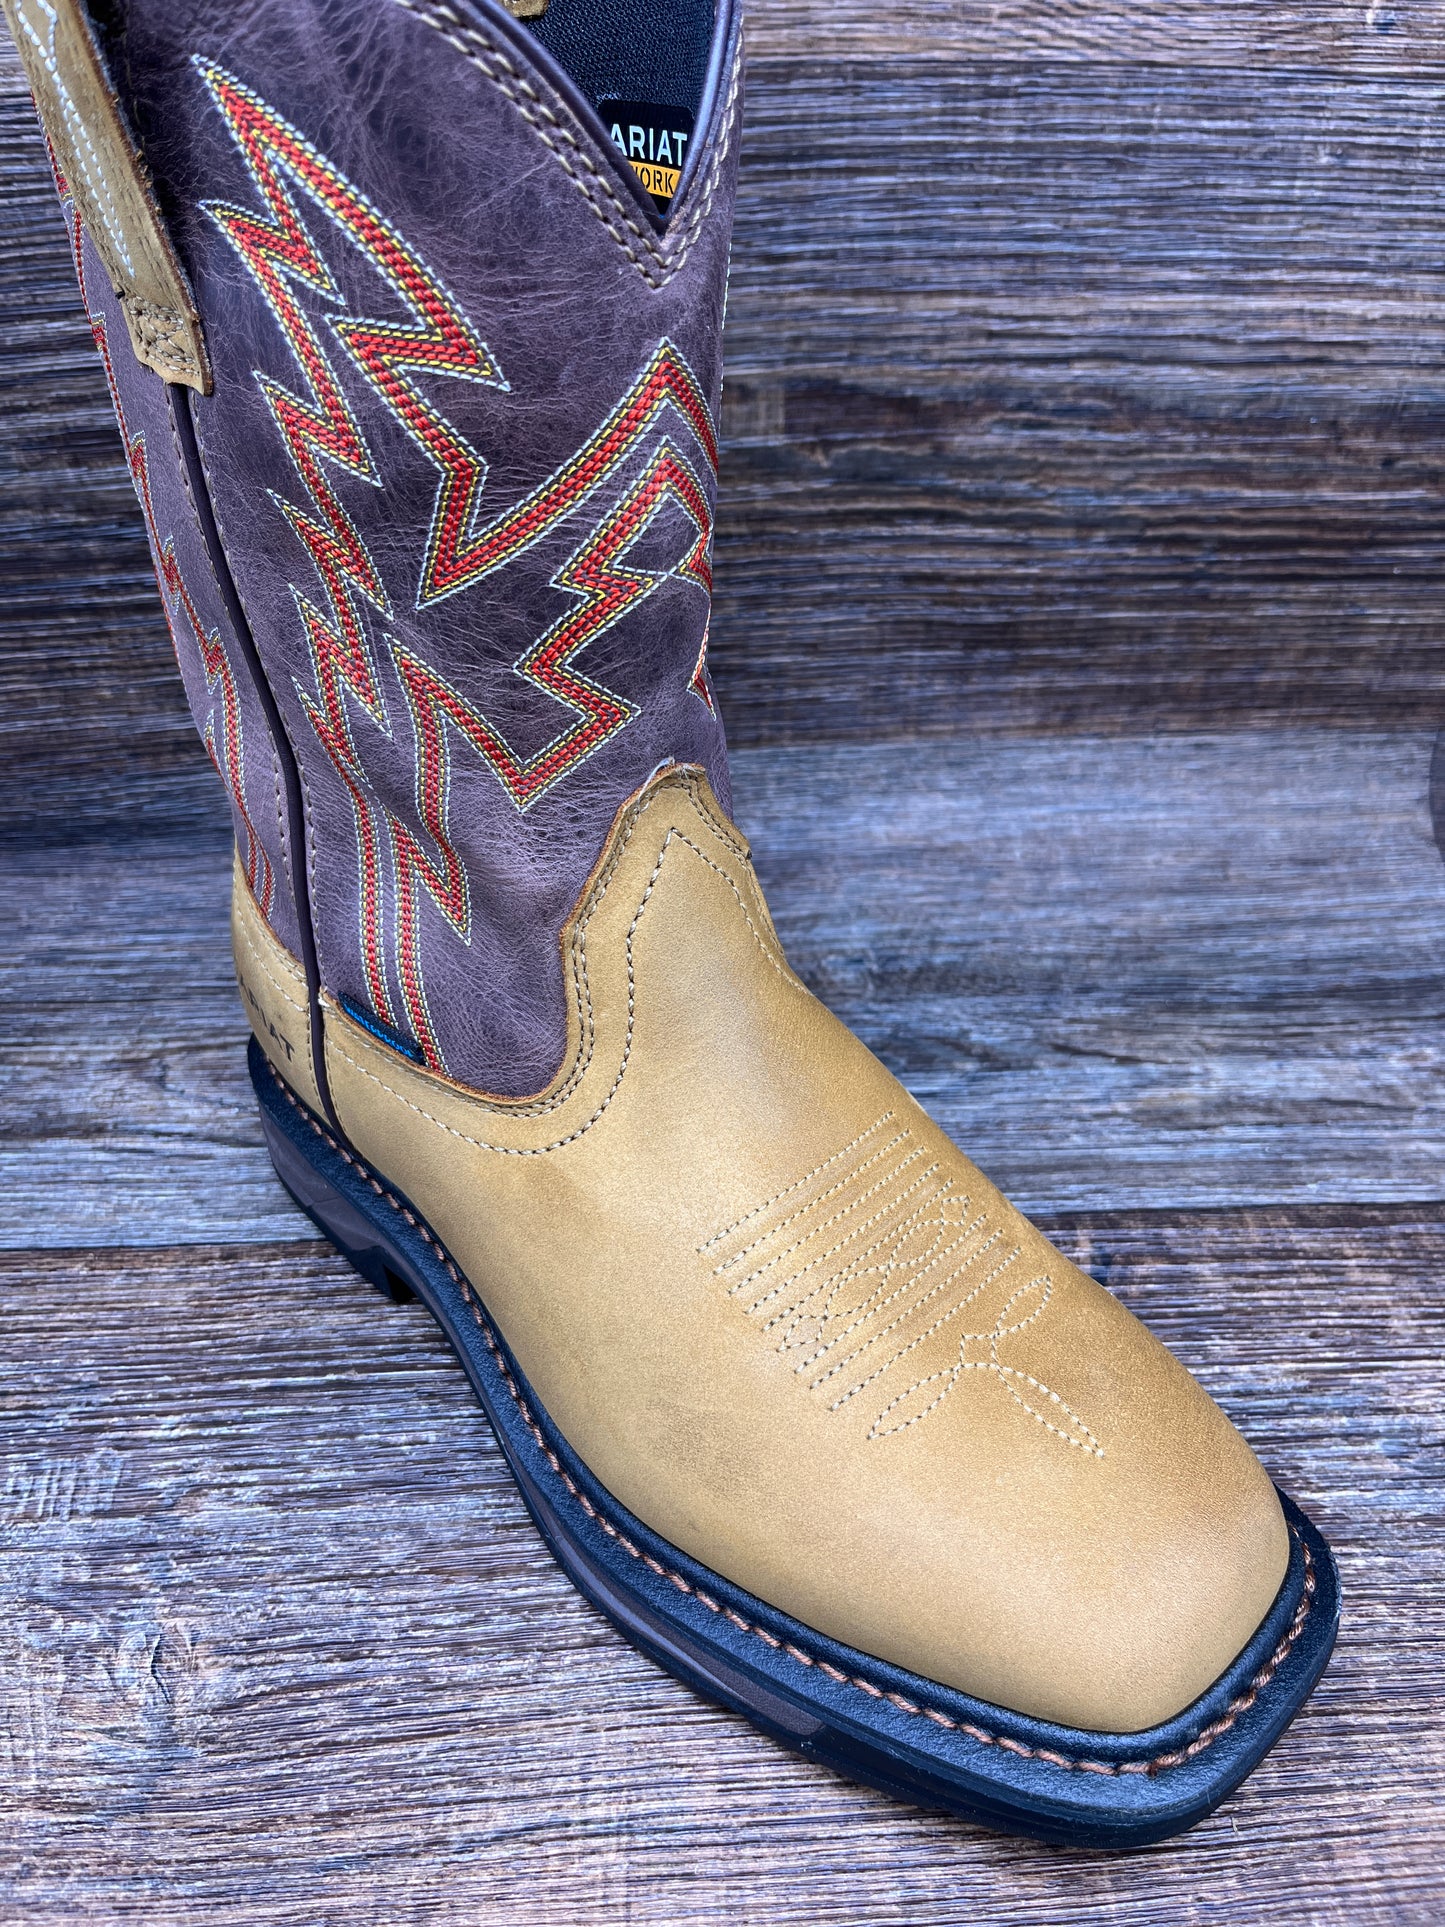 10038921 Men's Waterproof Soft Toe WorkHog XT with BOA System by Ariat